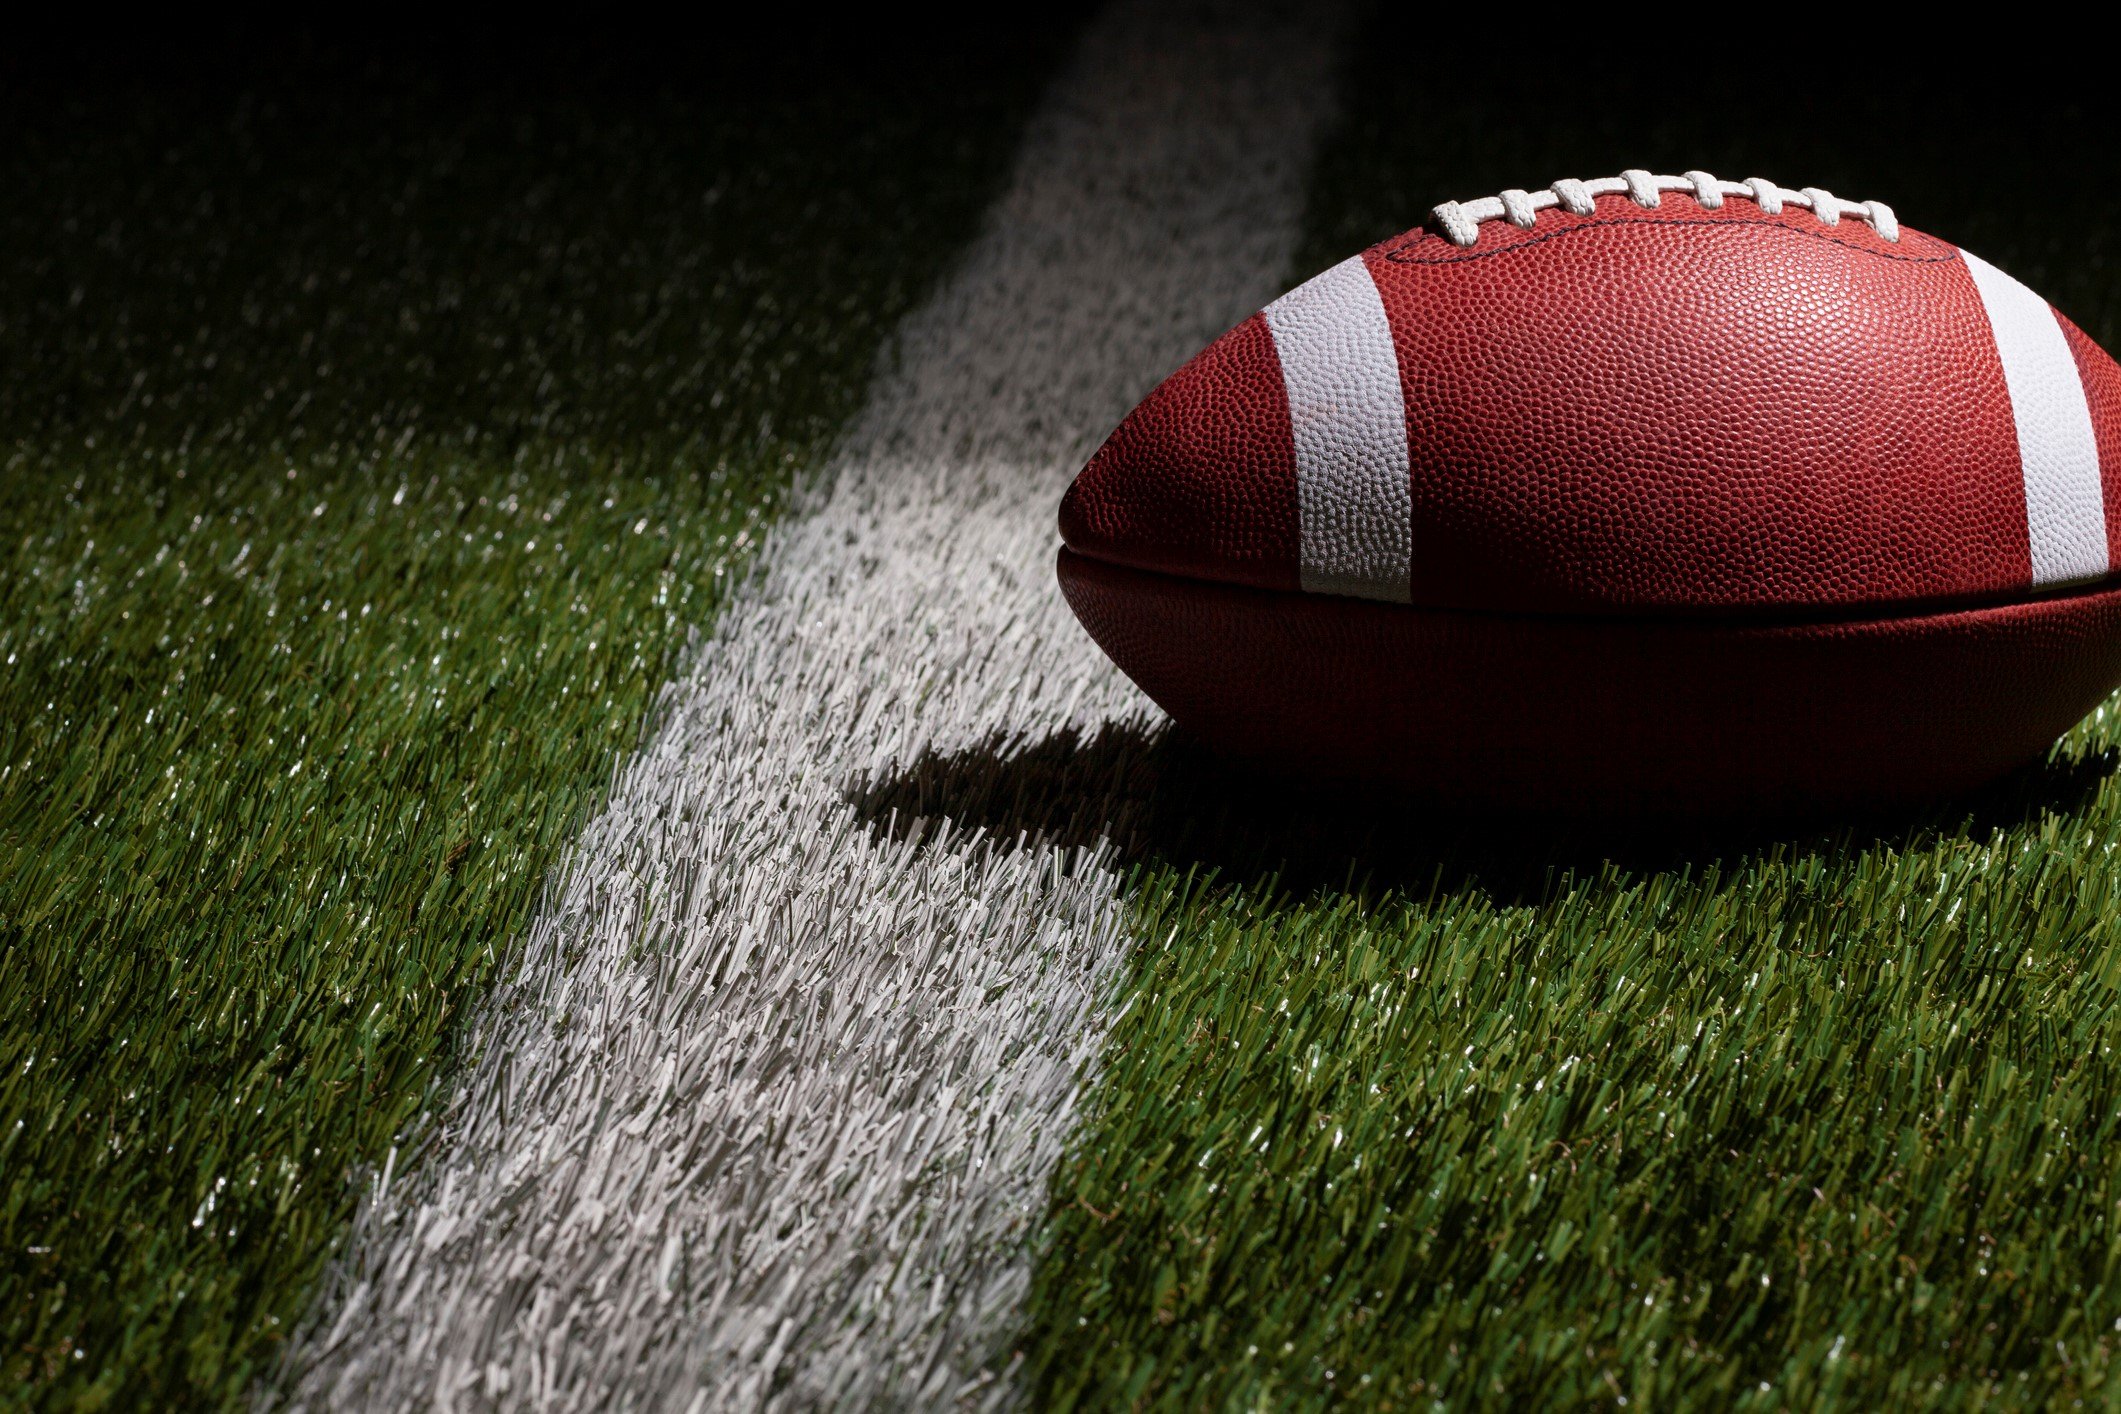 Low angle view of a football at a yard line with dramatic lighting - stock photo WillardGetty Images